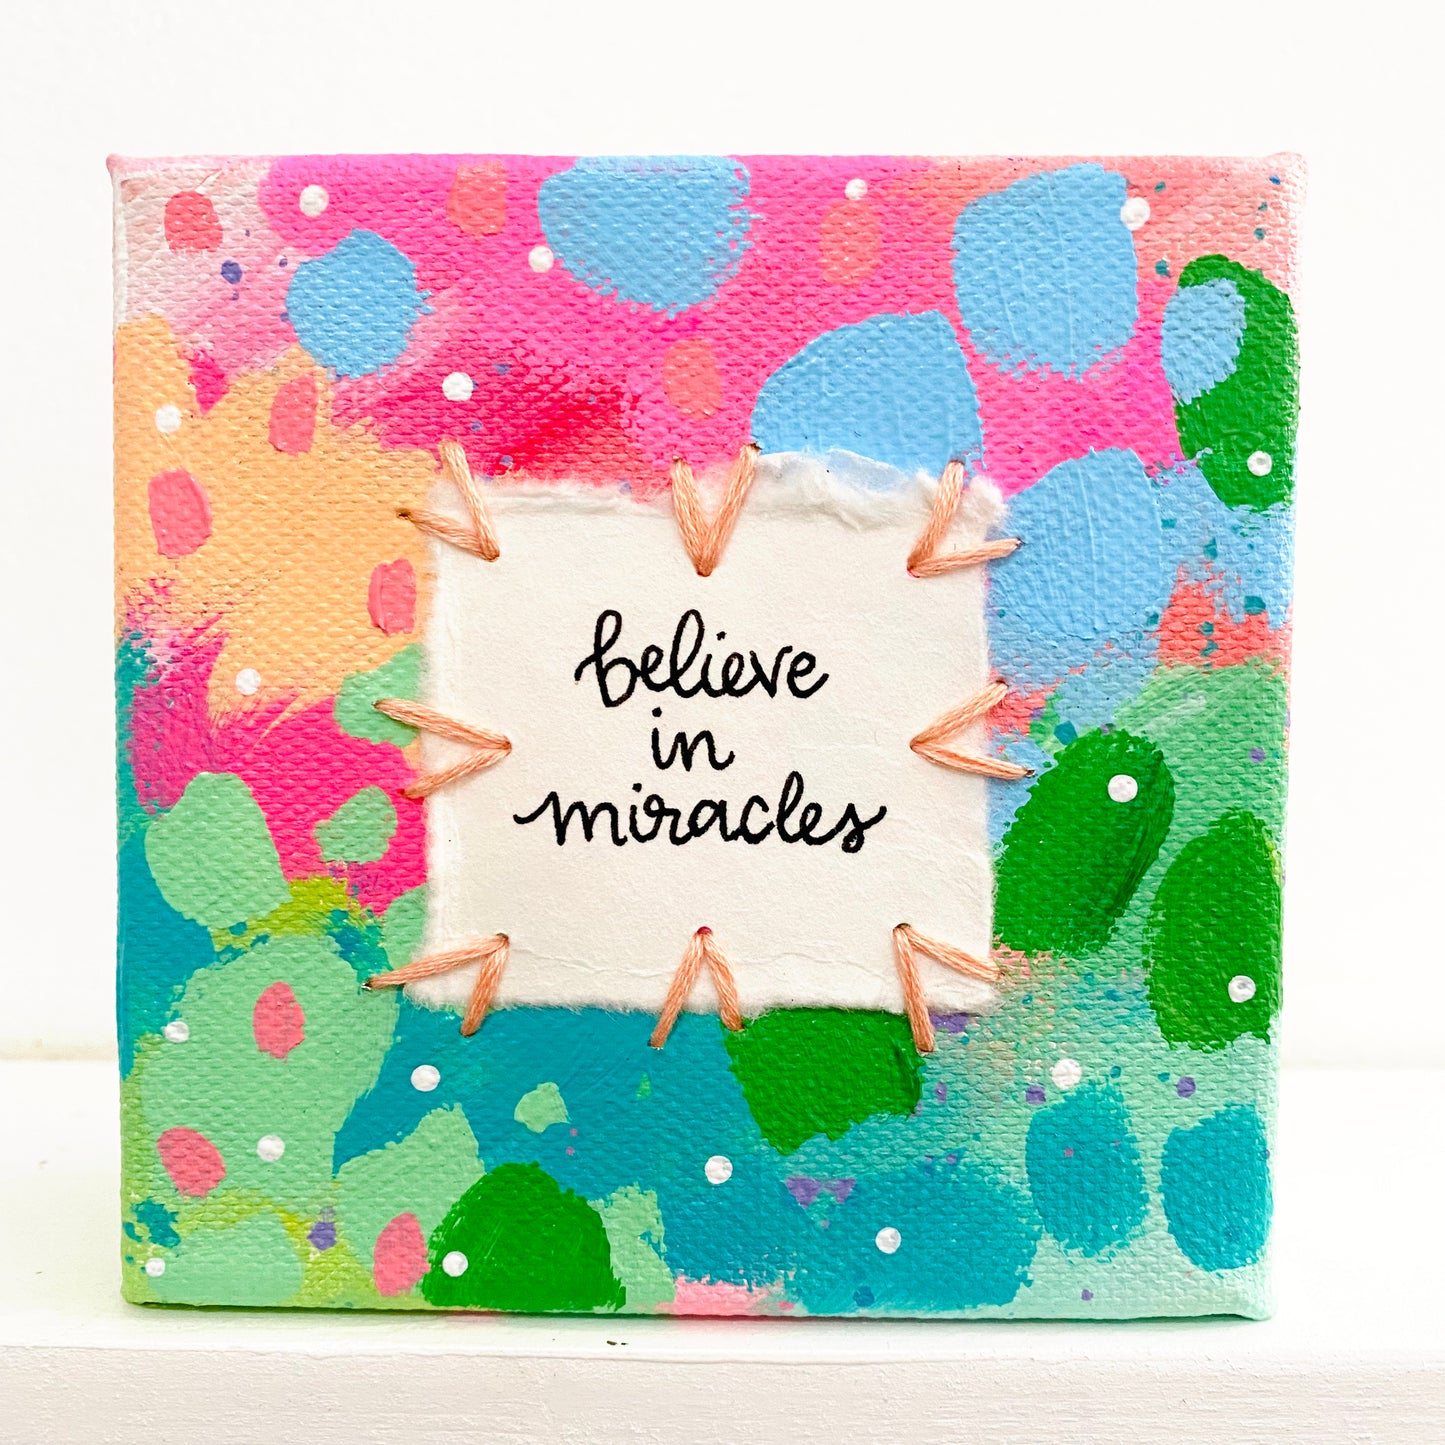 Believe in Miracles 4x4 inch original abstract canvas with embroidery thread accents